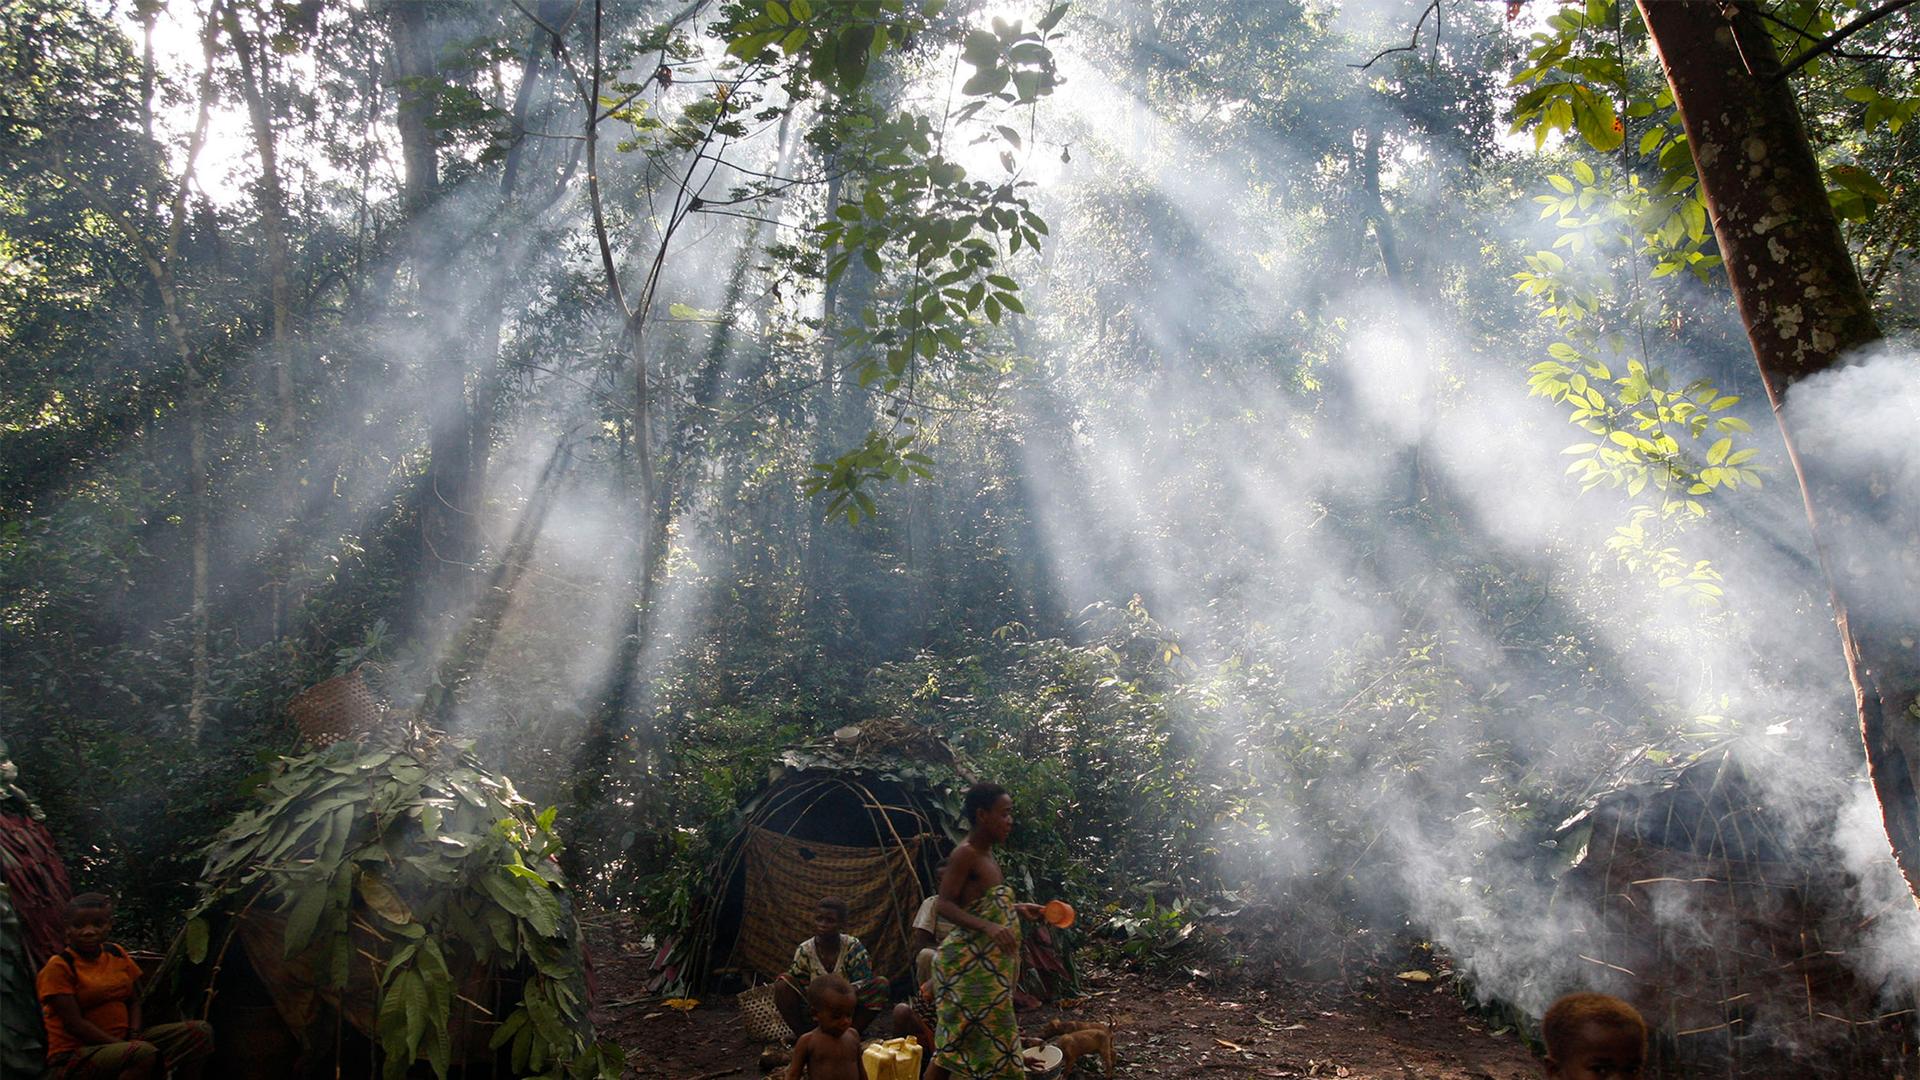 Shafts of sunlight filtering through the forest canopy strike smoke from fires burning outside family huts at an Mbuti pygmy hunting camp in the Okapi Wildlife Reserve outside the town of Epulu, Congo